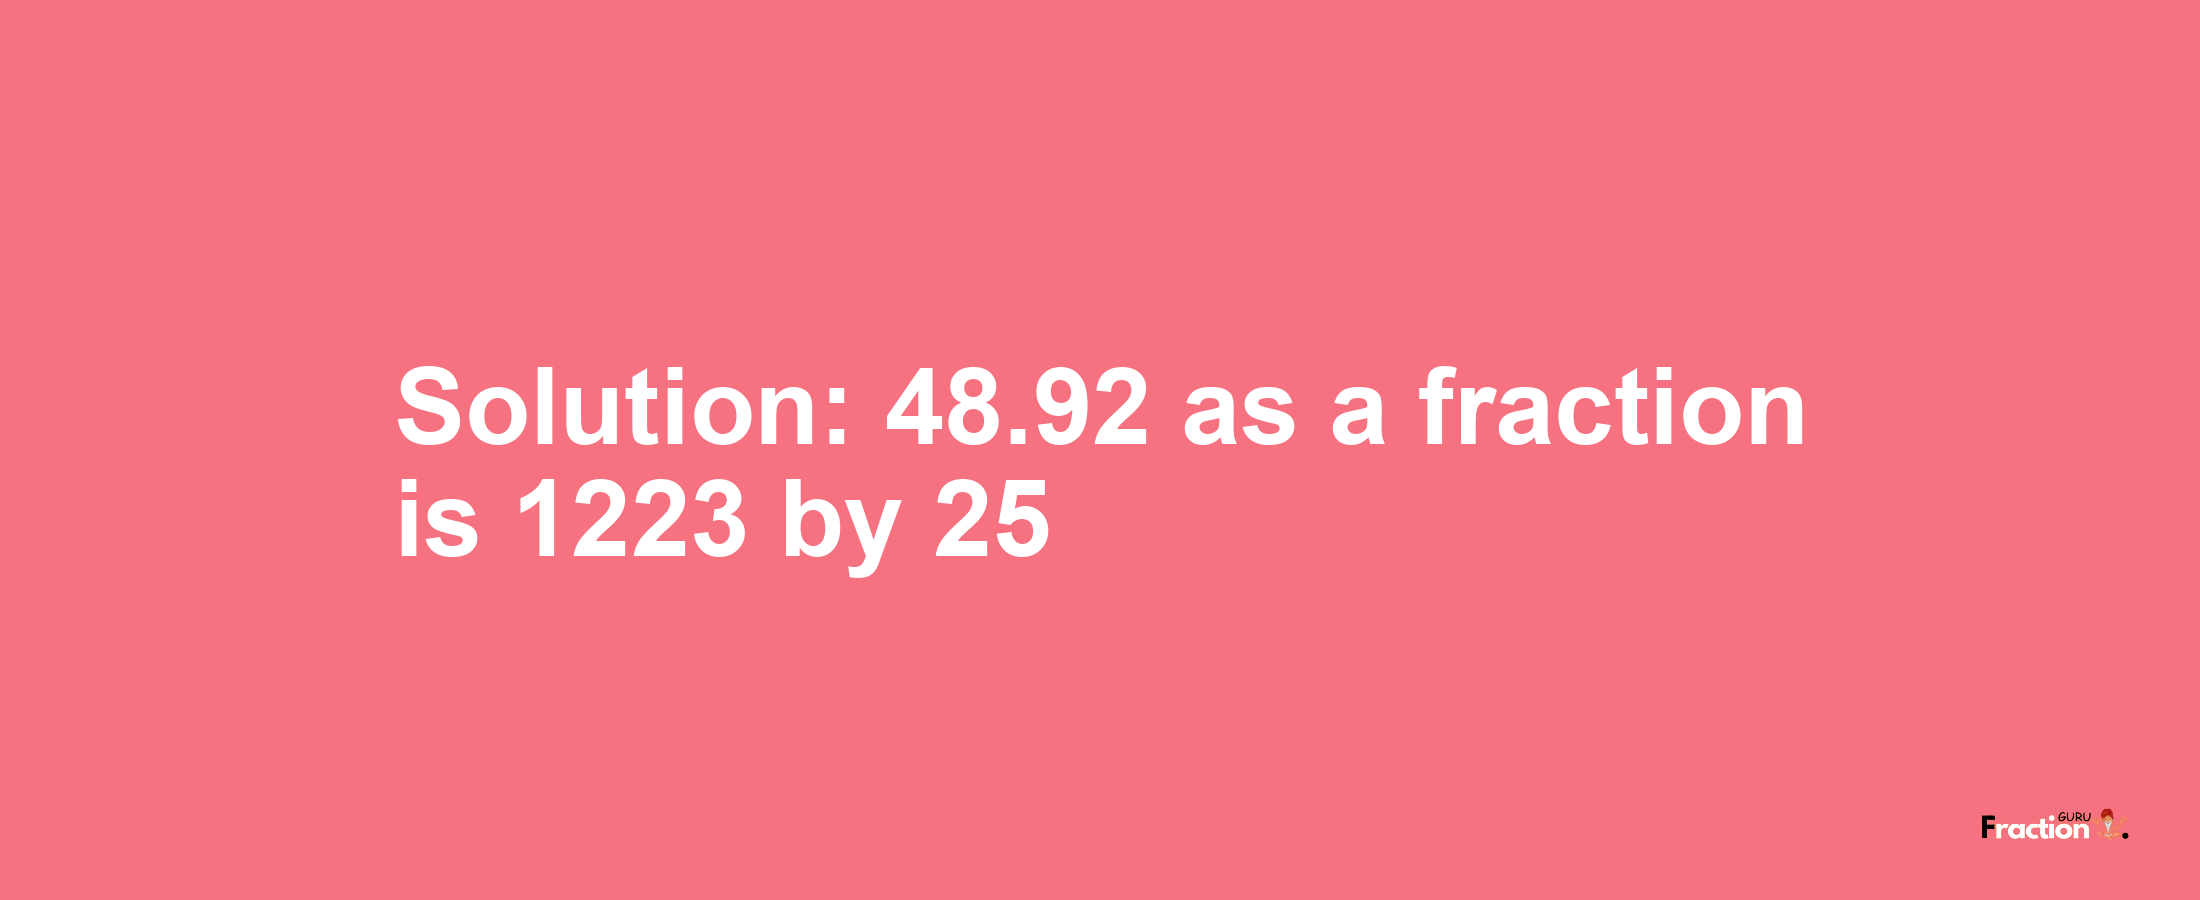 Solution:48.92 as a fraction is 1223/25